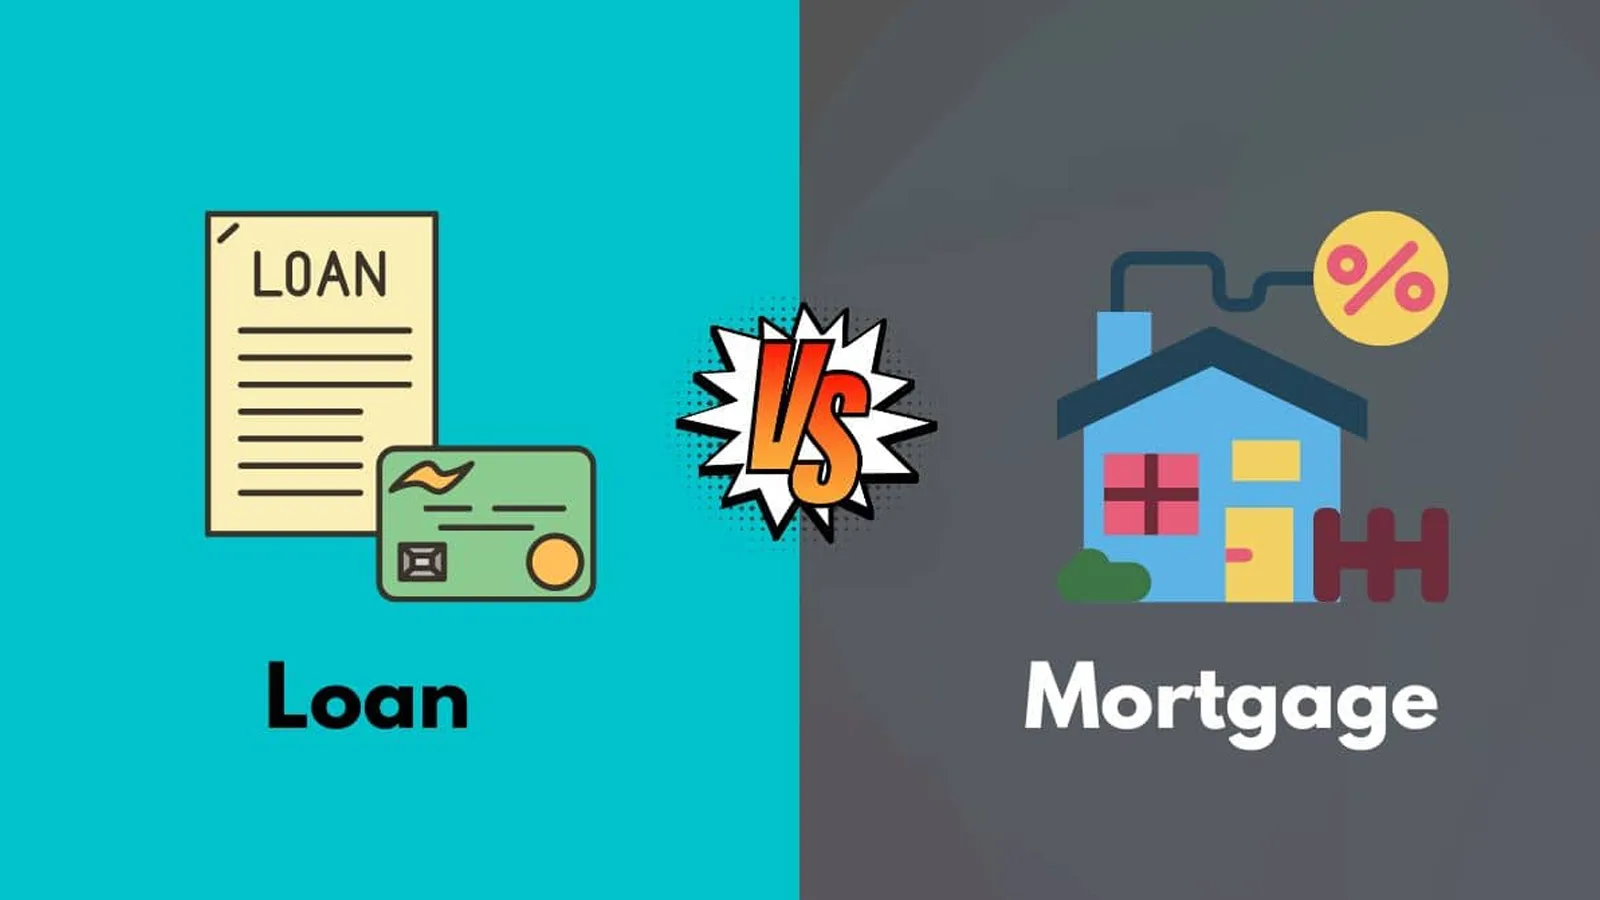 What's the difference between a mortgage and a loan